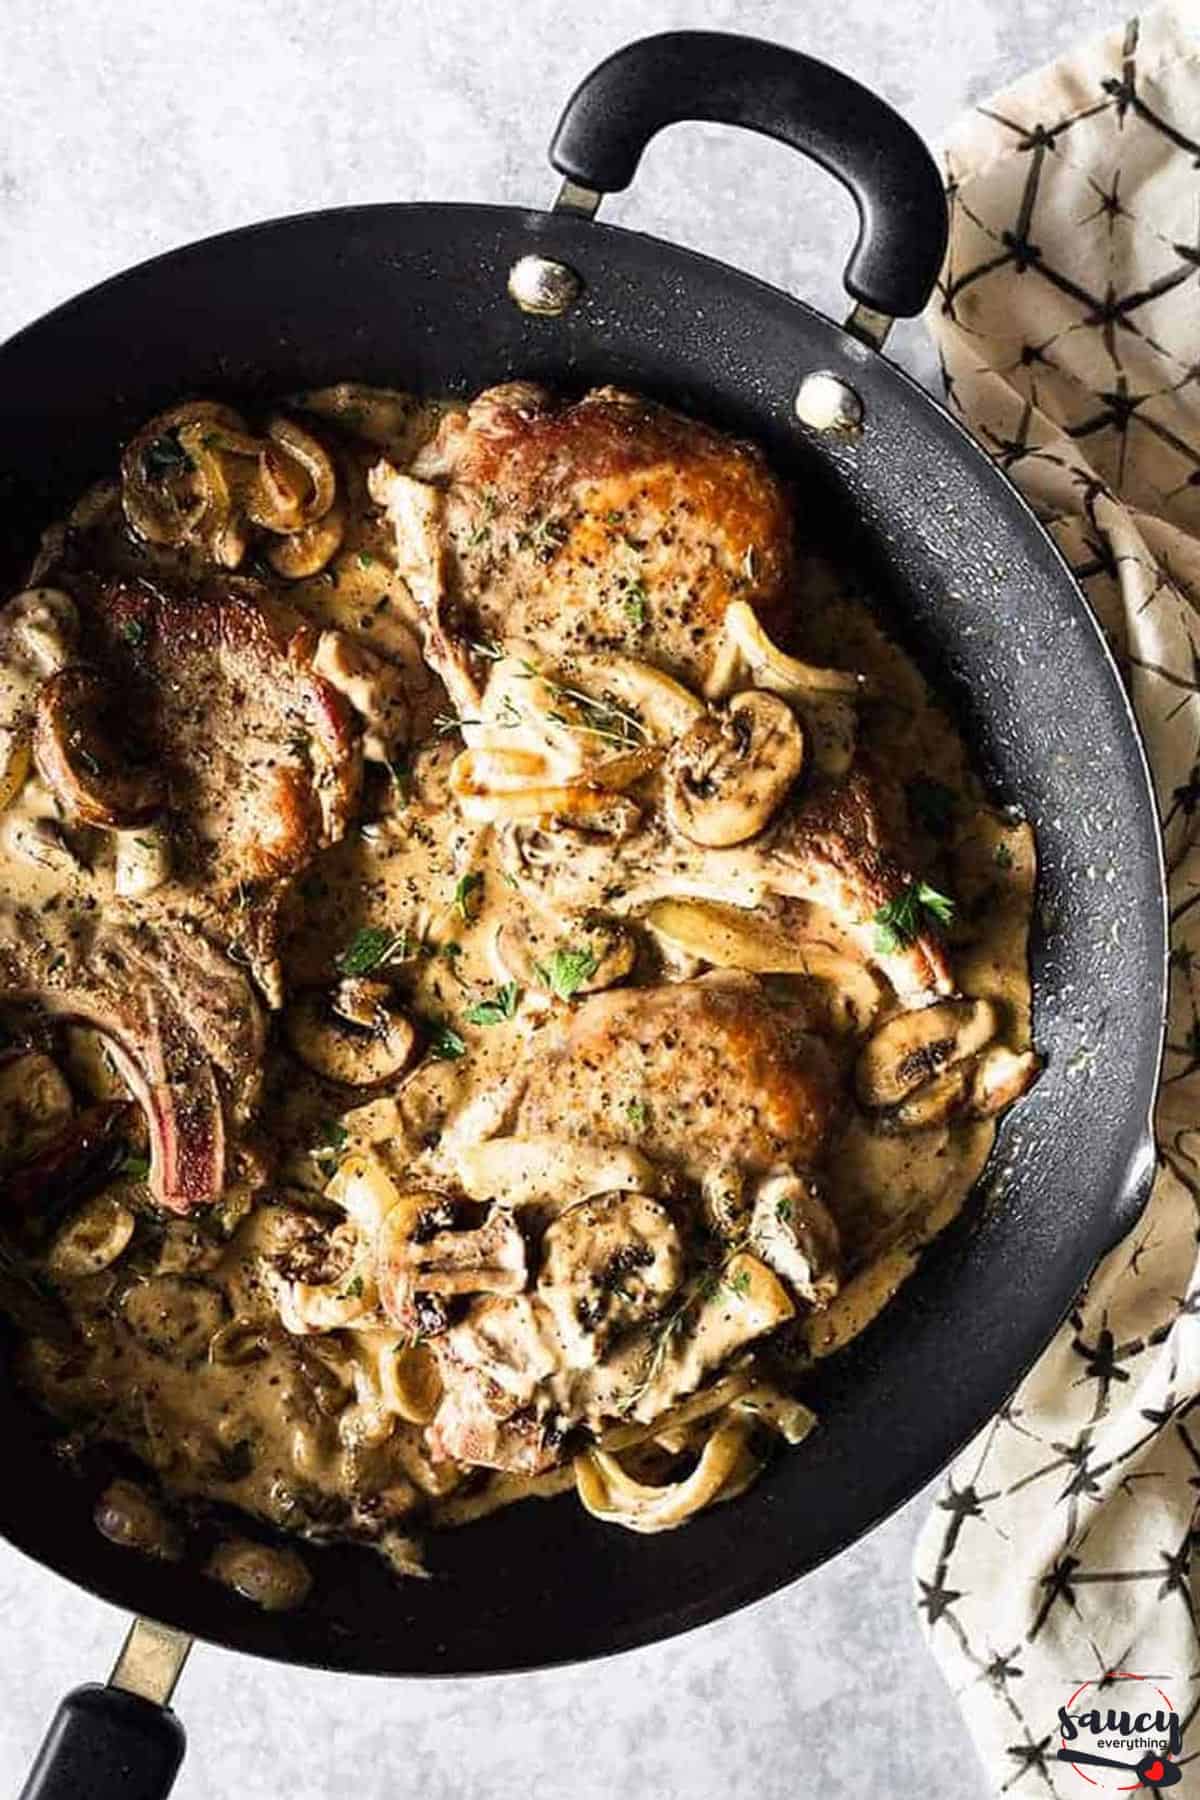 Mushrooms and onions served with pork chops in a cream sauce